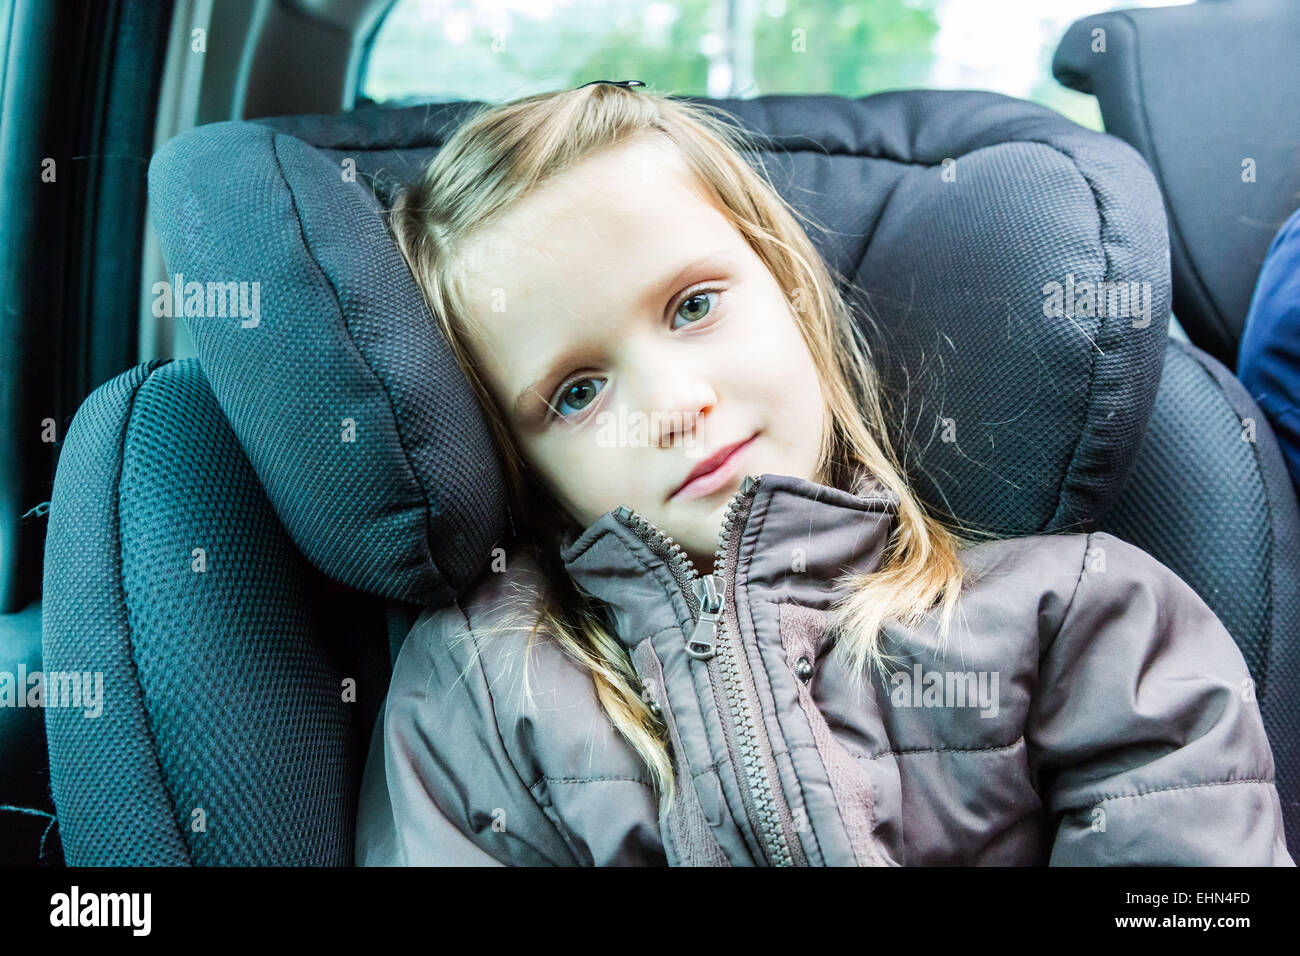 5 year old girl in a car. Stock Photo